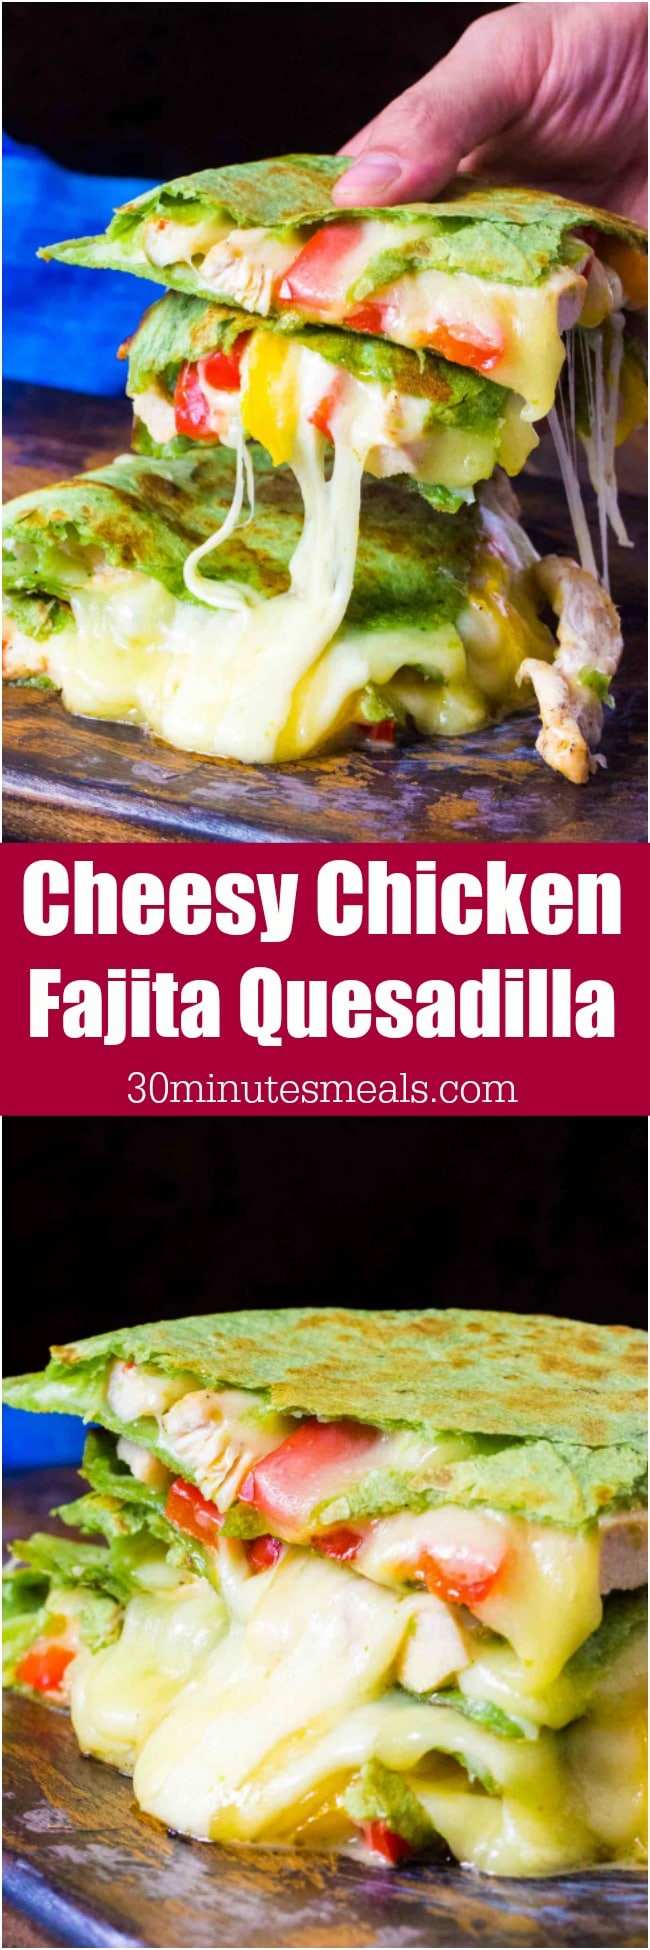 Cheesy Chicken Fajita Quesadilla is loaded with juicy and tender chicken meat, crunchy bell peppers and lots of delicious, melting cheese.